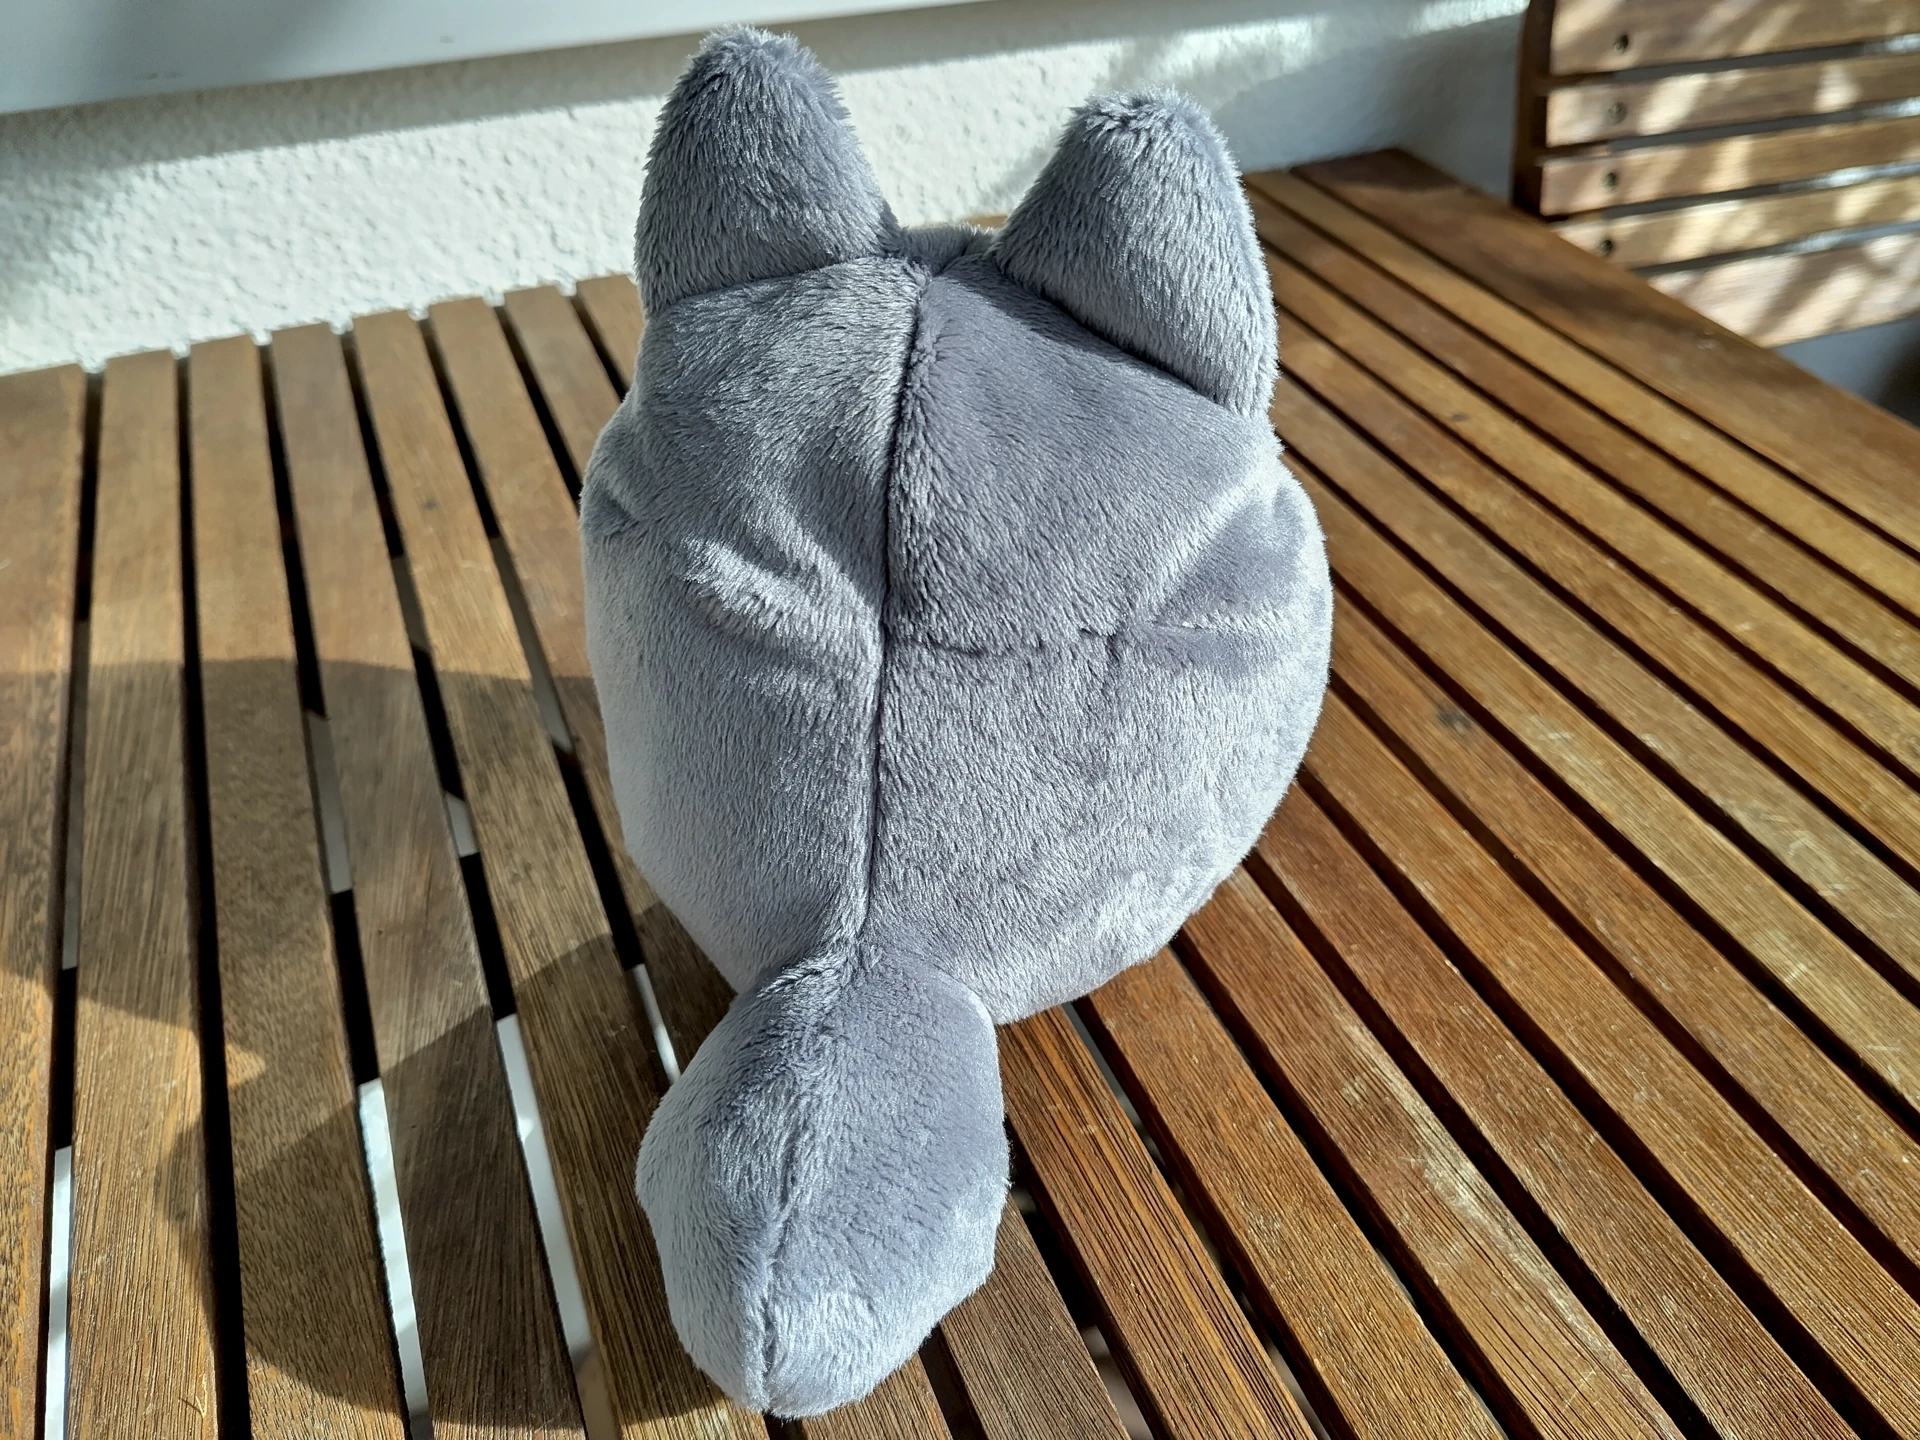 Totoro plushie seen from the back, it's all grey colored from there.